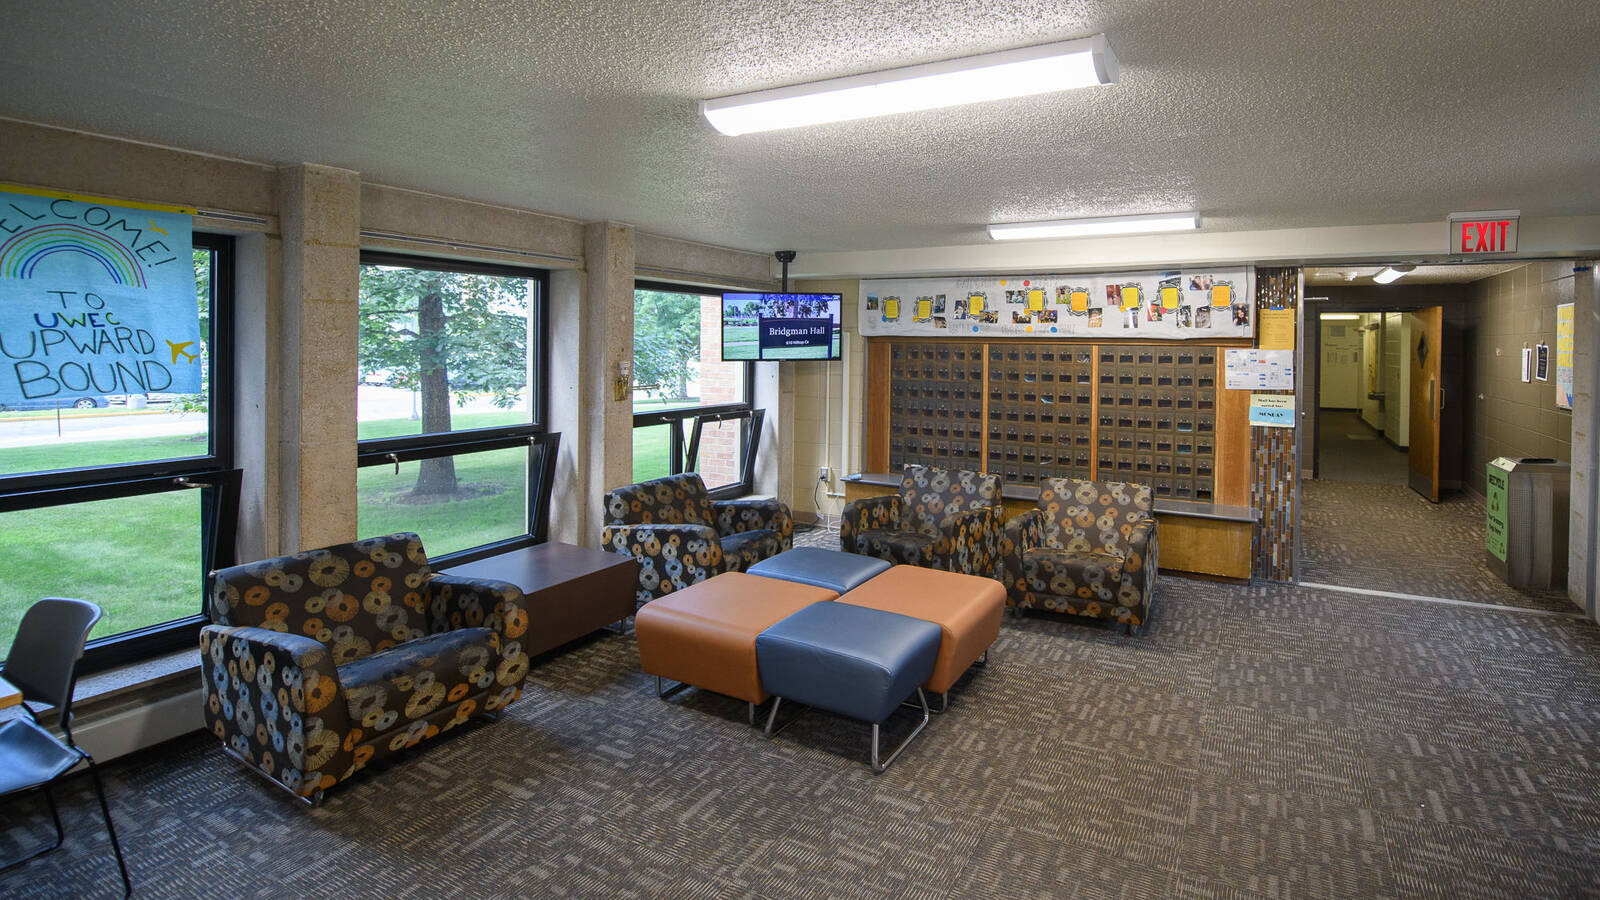 Lobby area in Bridgman Hall, complete with chairs for lounging and mailboxes.